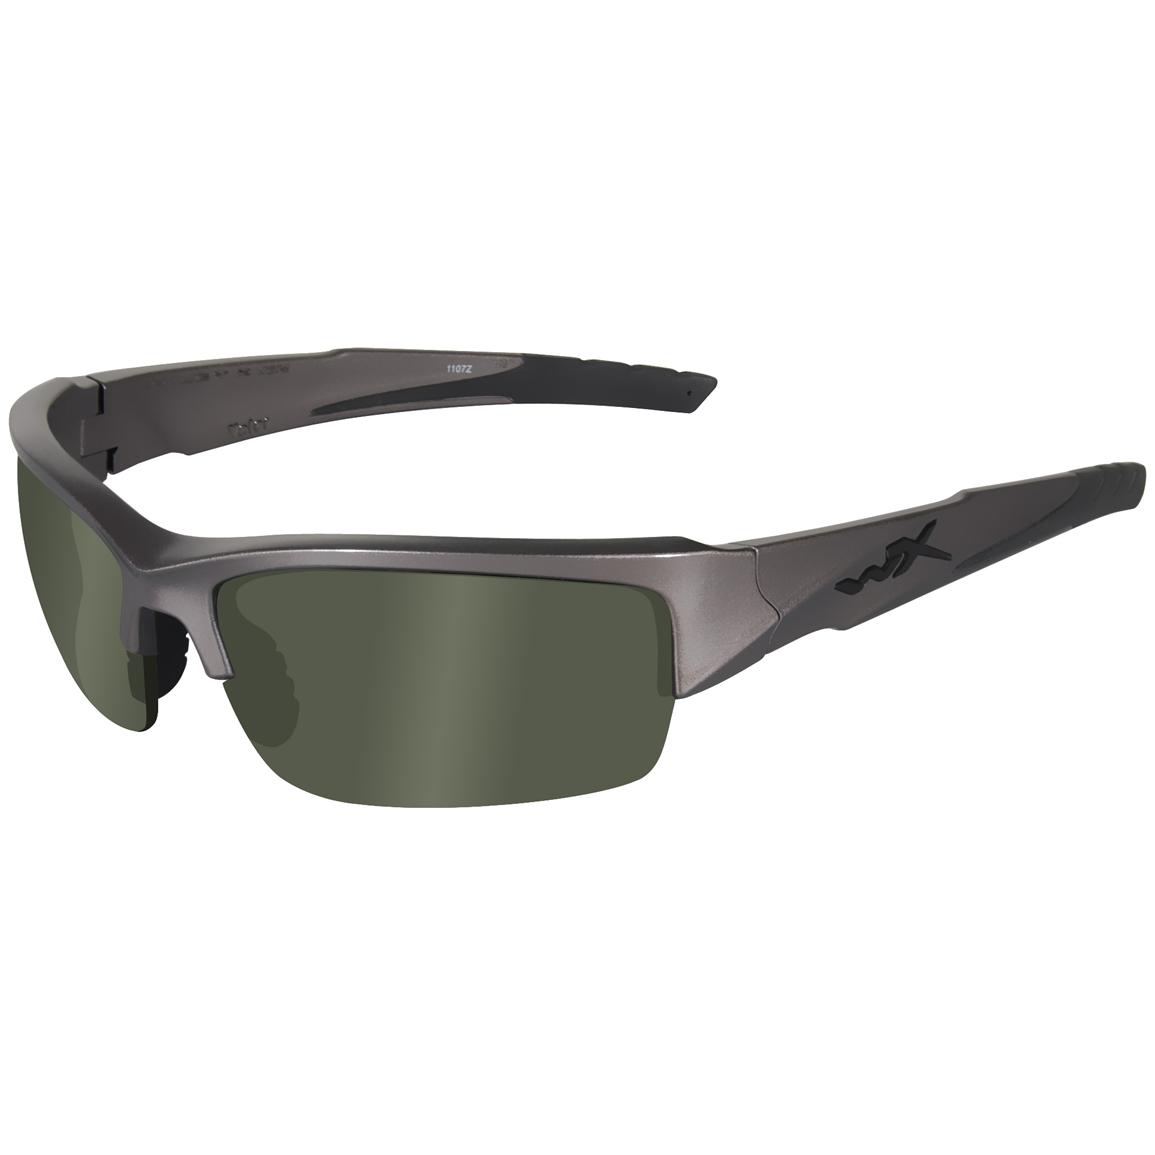 Wiley X® Valor Changeables Polarized Sunglasses. Green